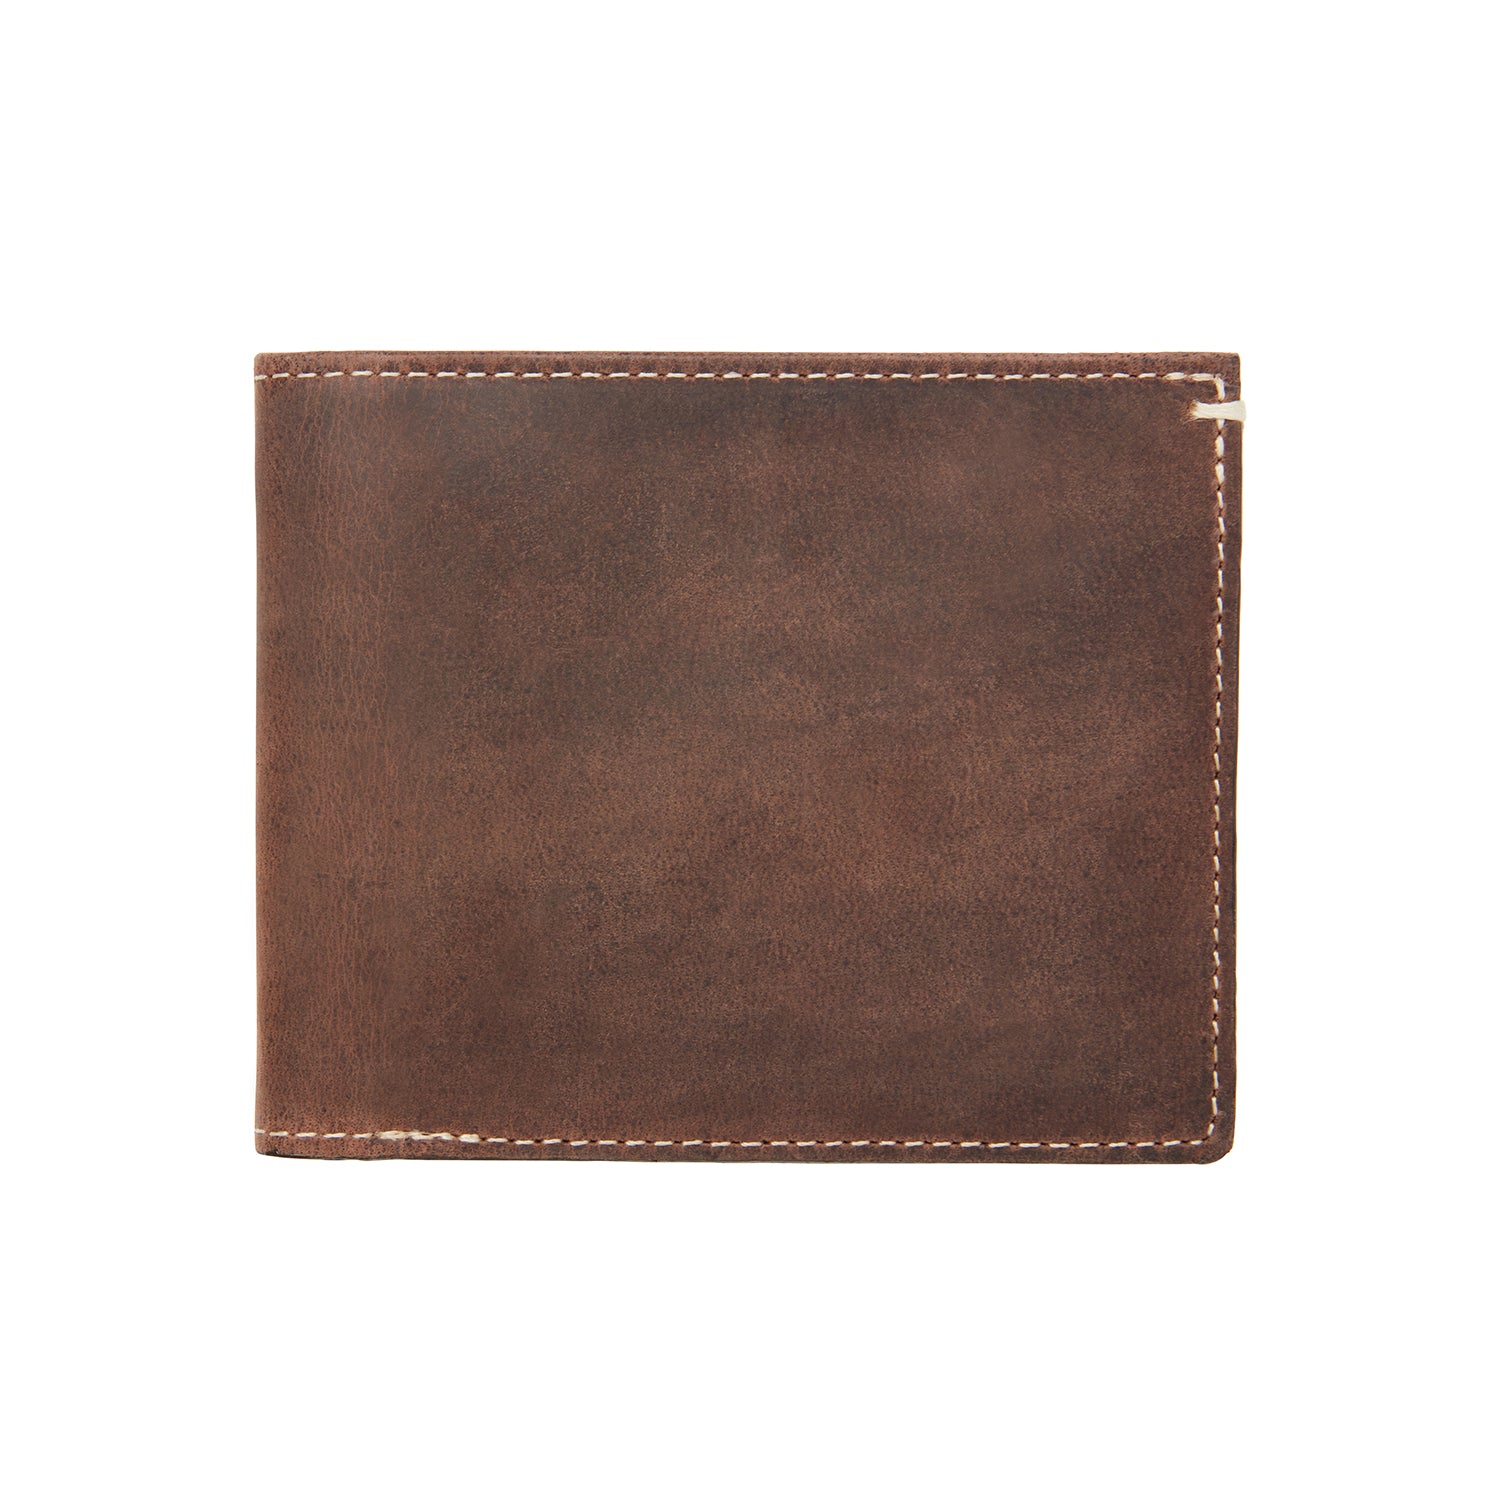 Hipster Wallet - Mad Dog :: Chocolate